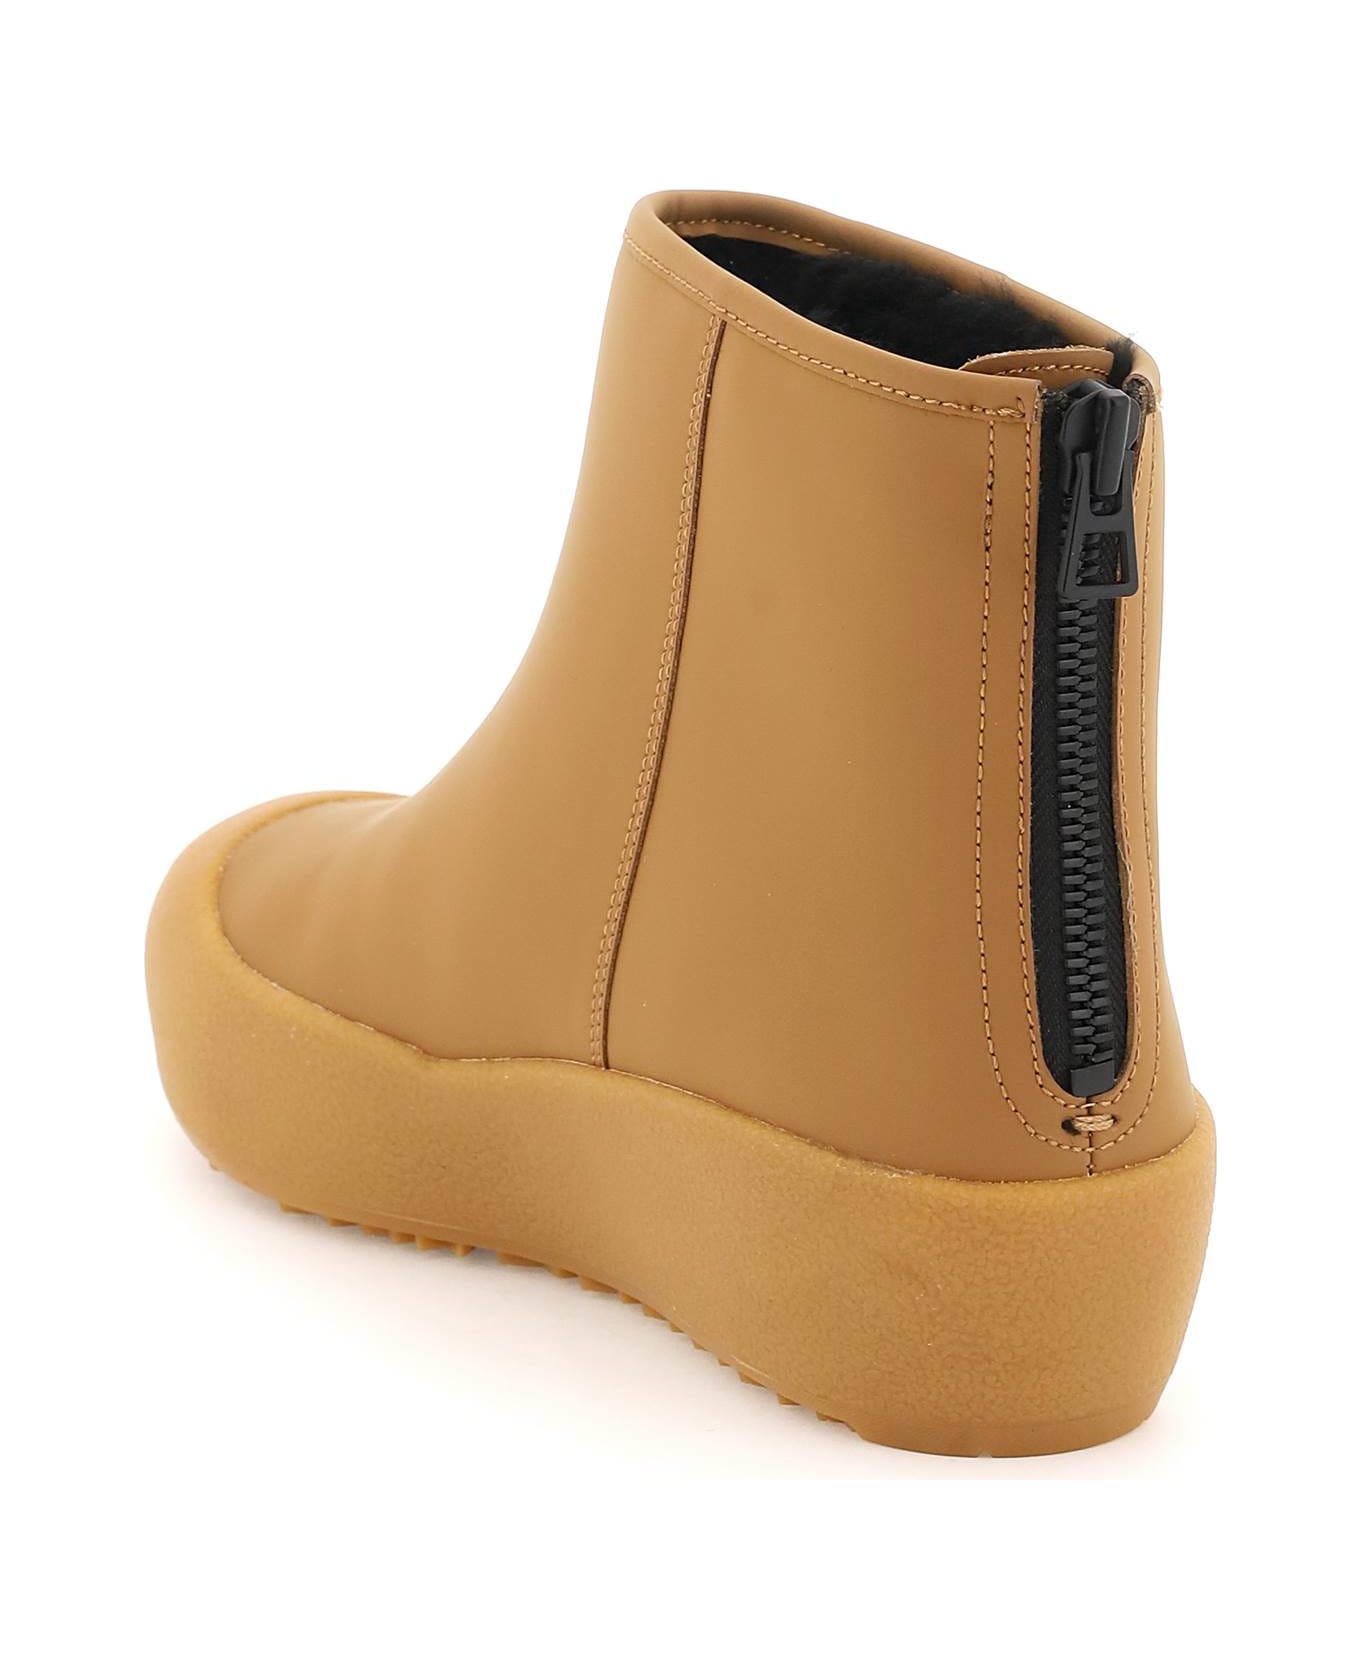 Bally 'bernina' Leather Ankle Boots - CAMEL 50 (Beige) ブーツ